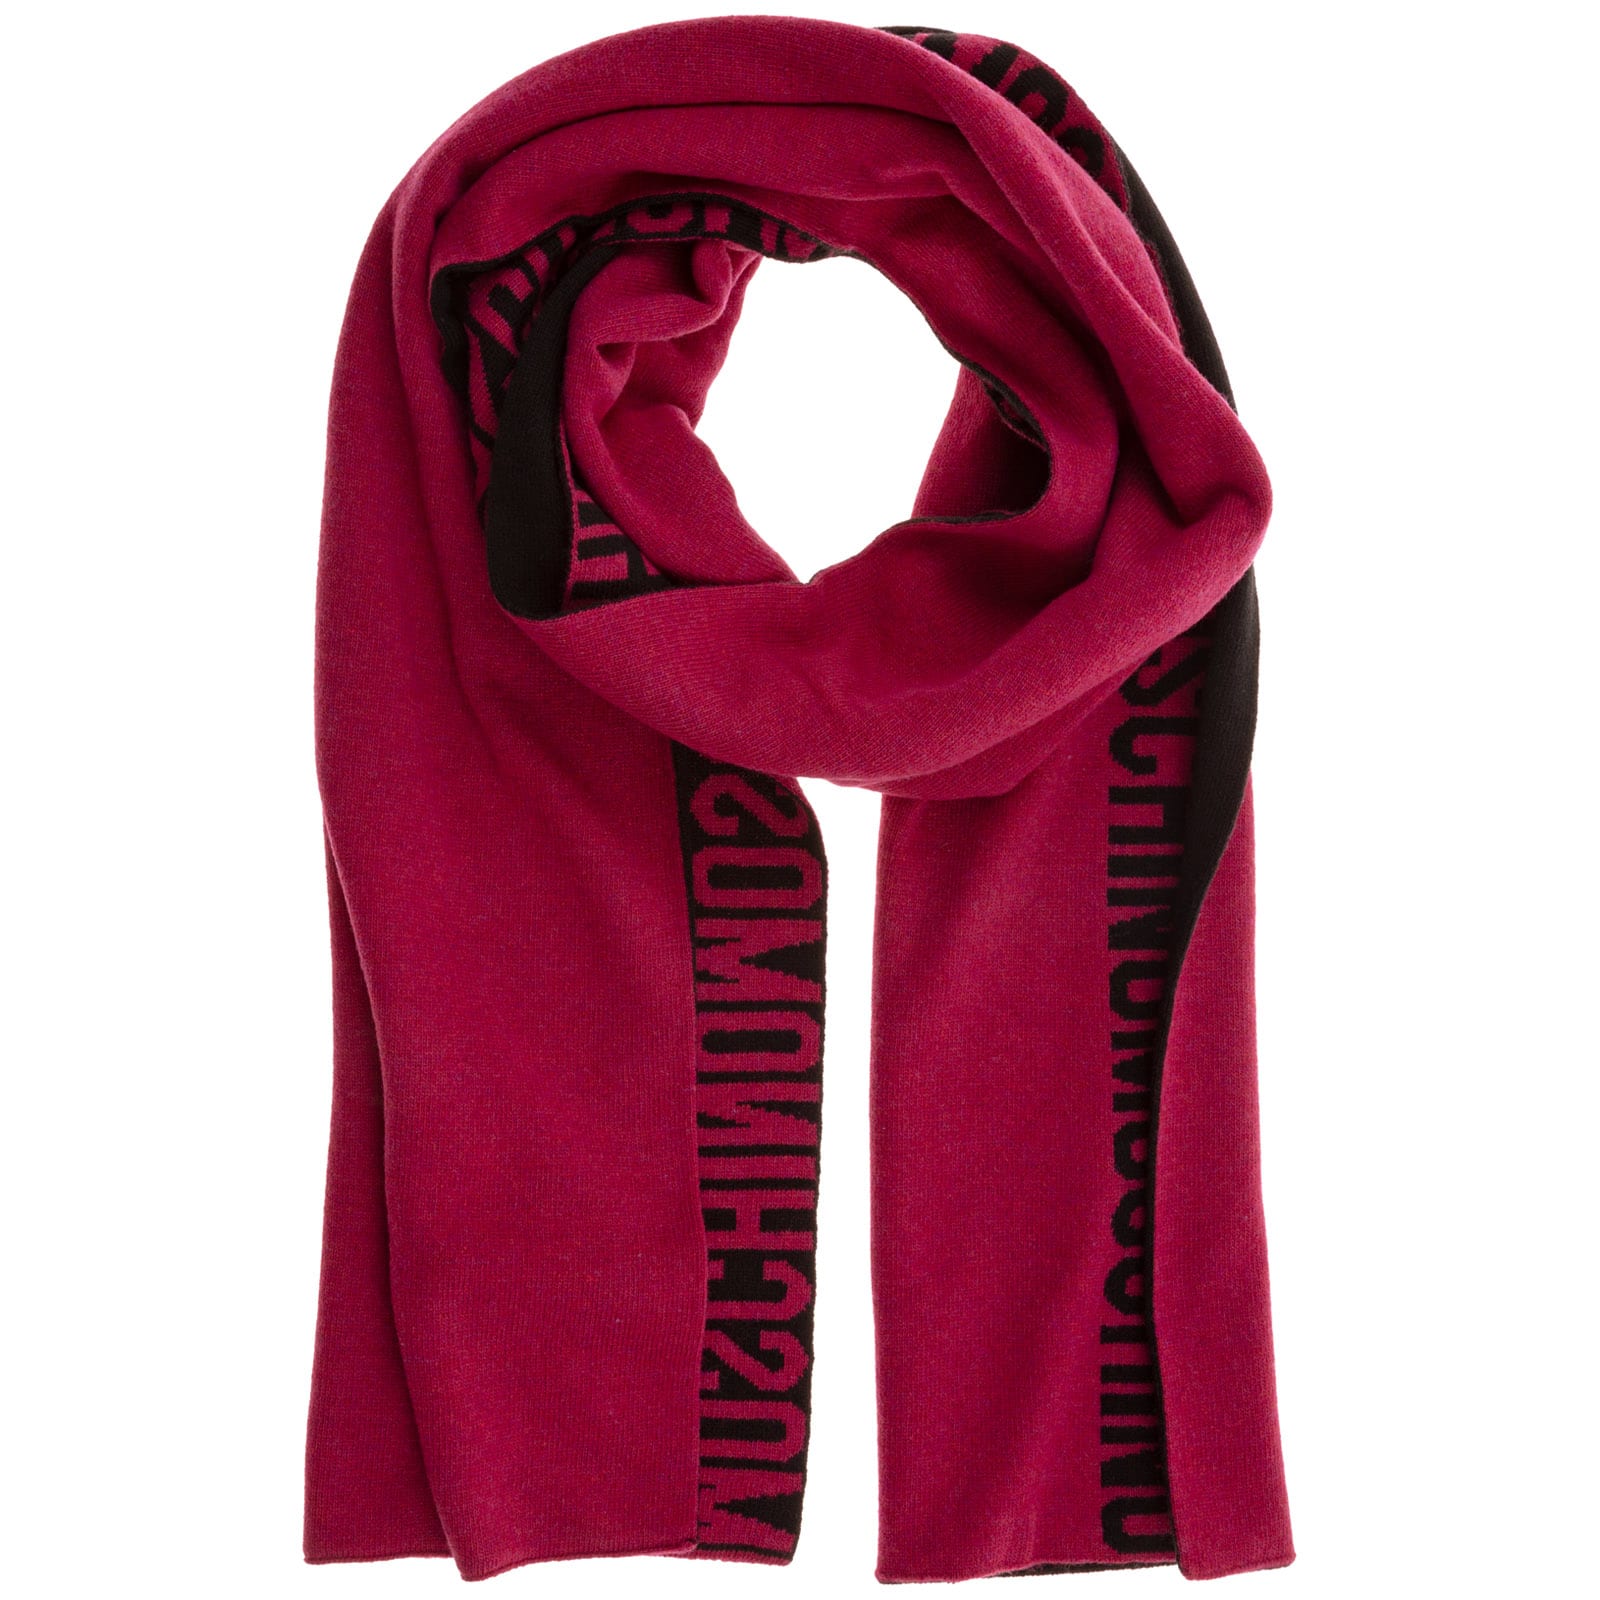 MOSCHINO DOUBLE QUESTION MARK SCARF,M235230679009